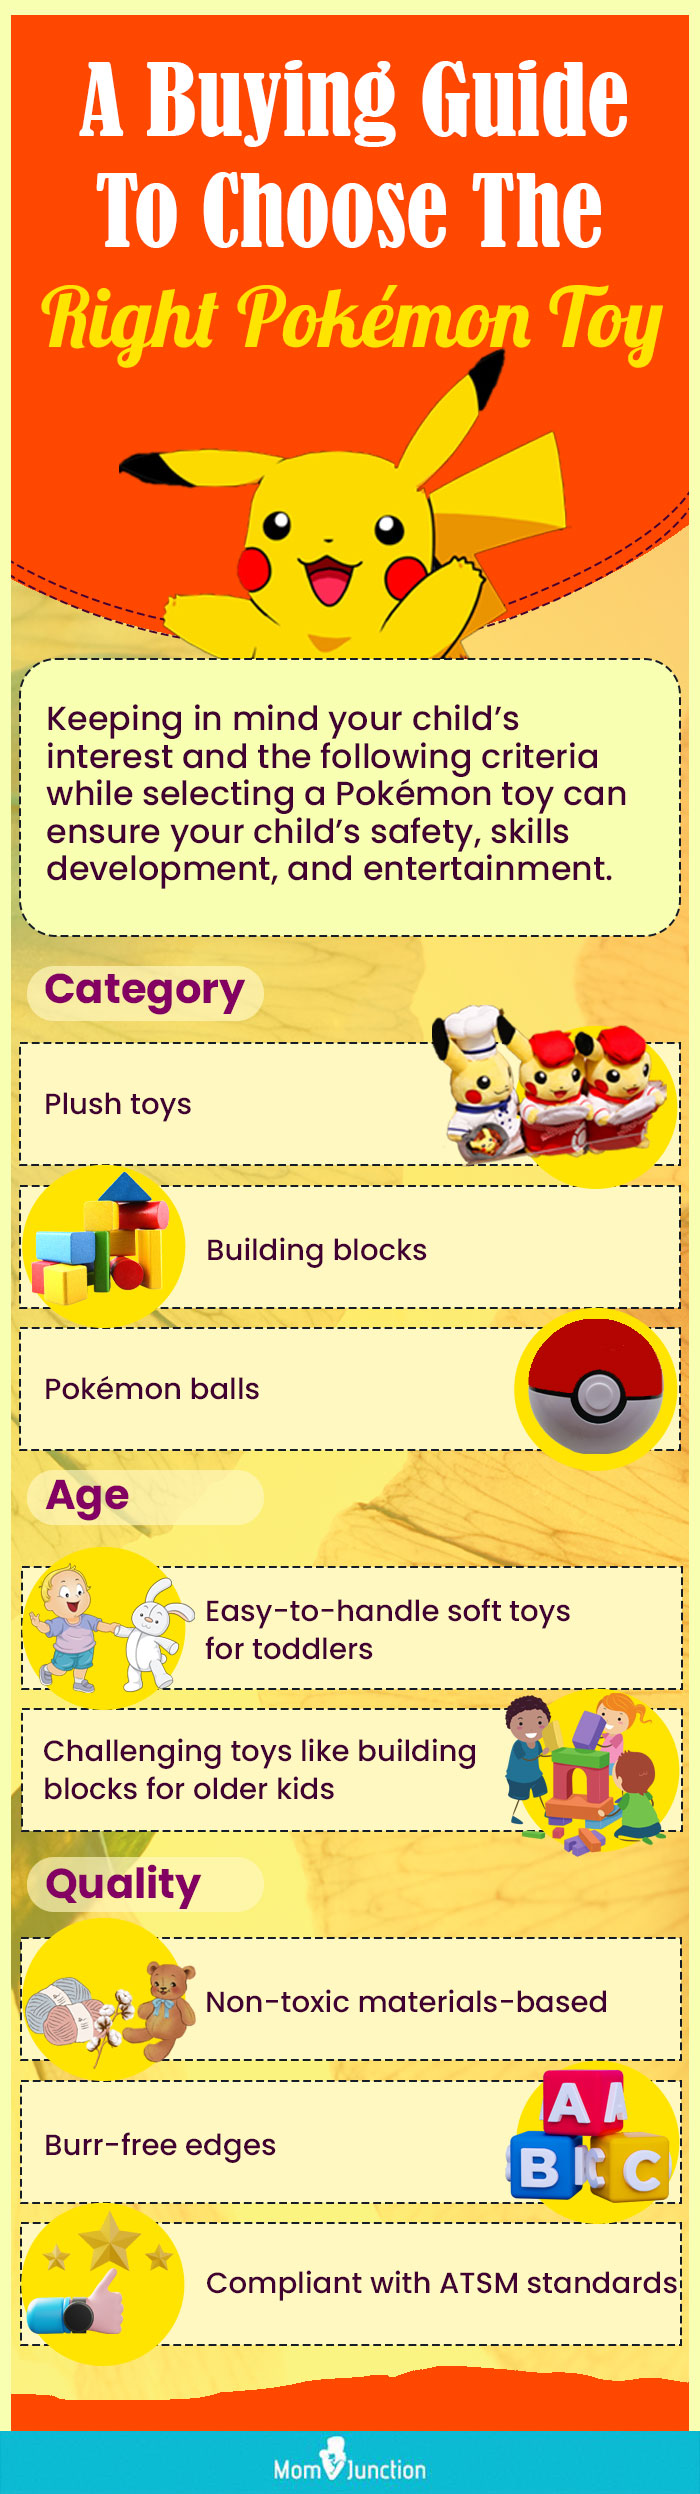 A Buying Guide To Choose The Right Pokémon Toy